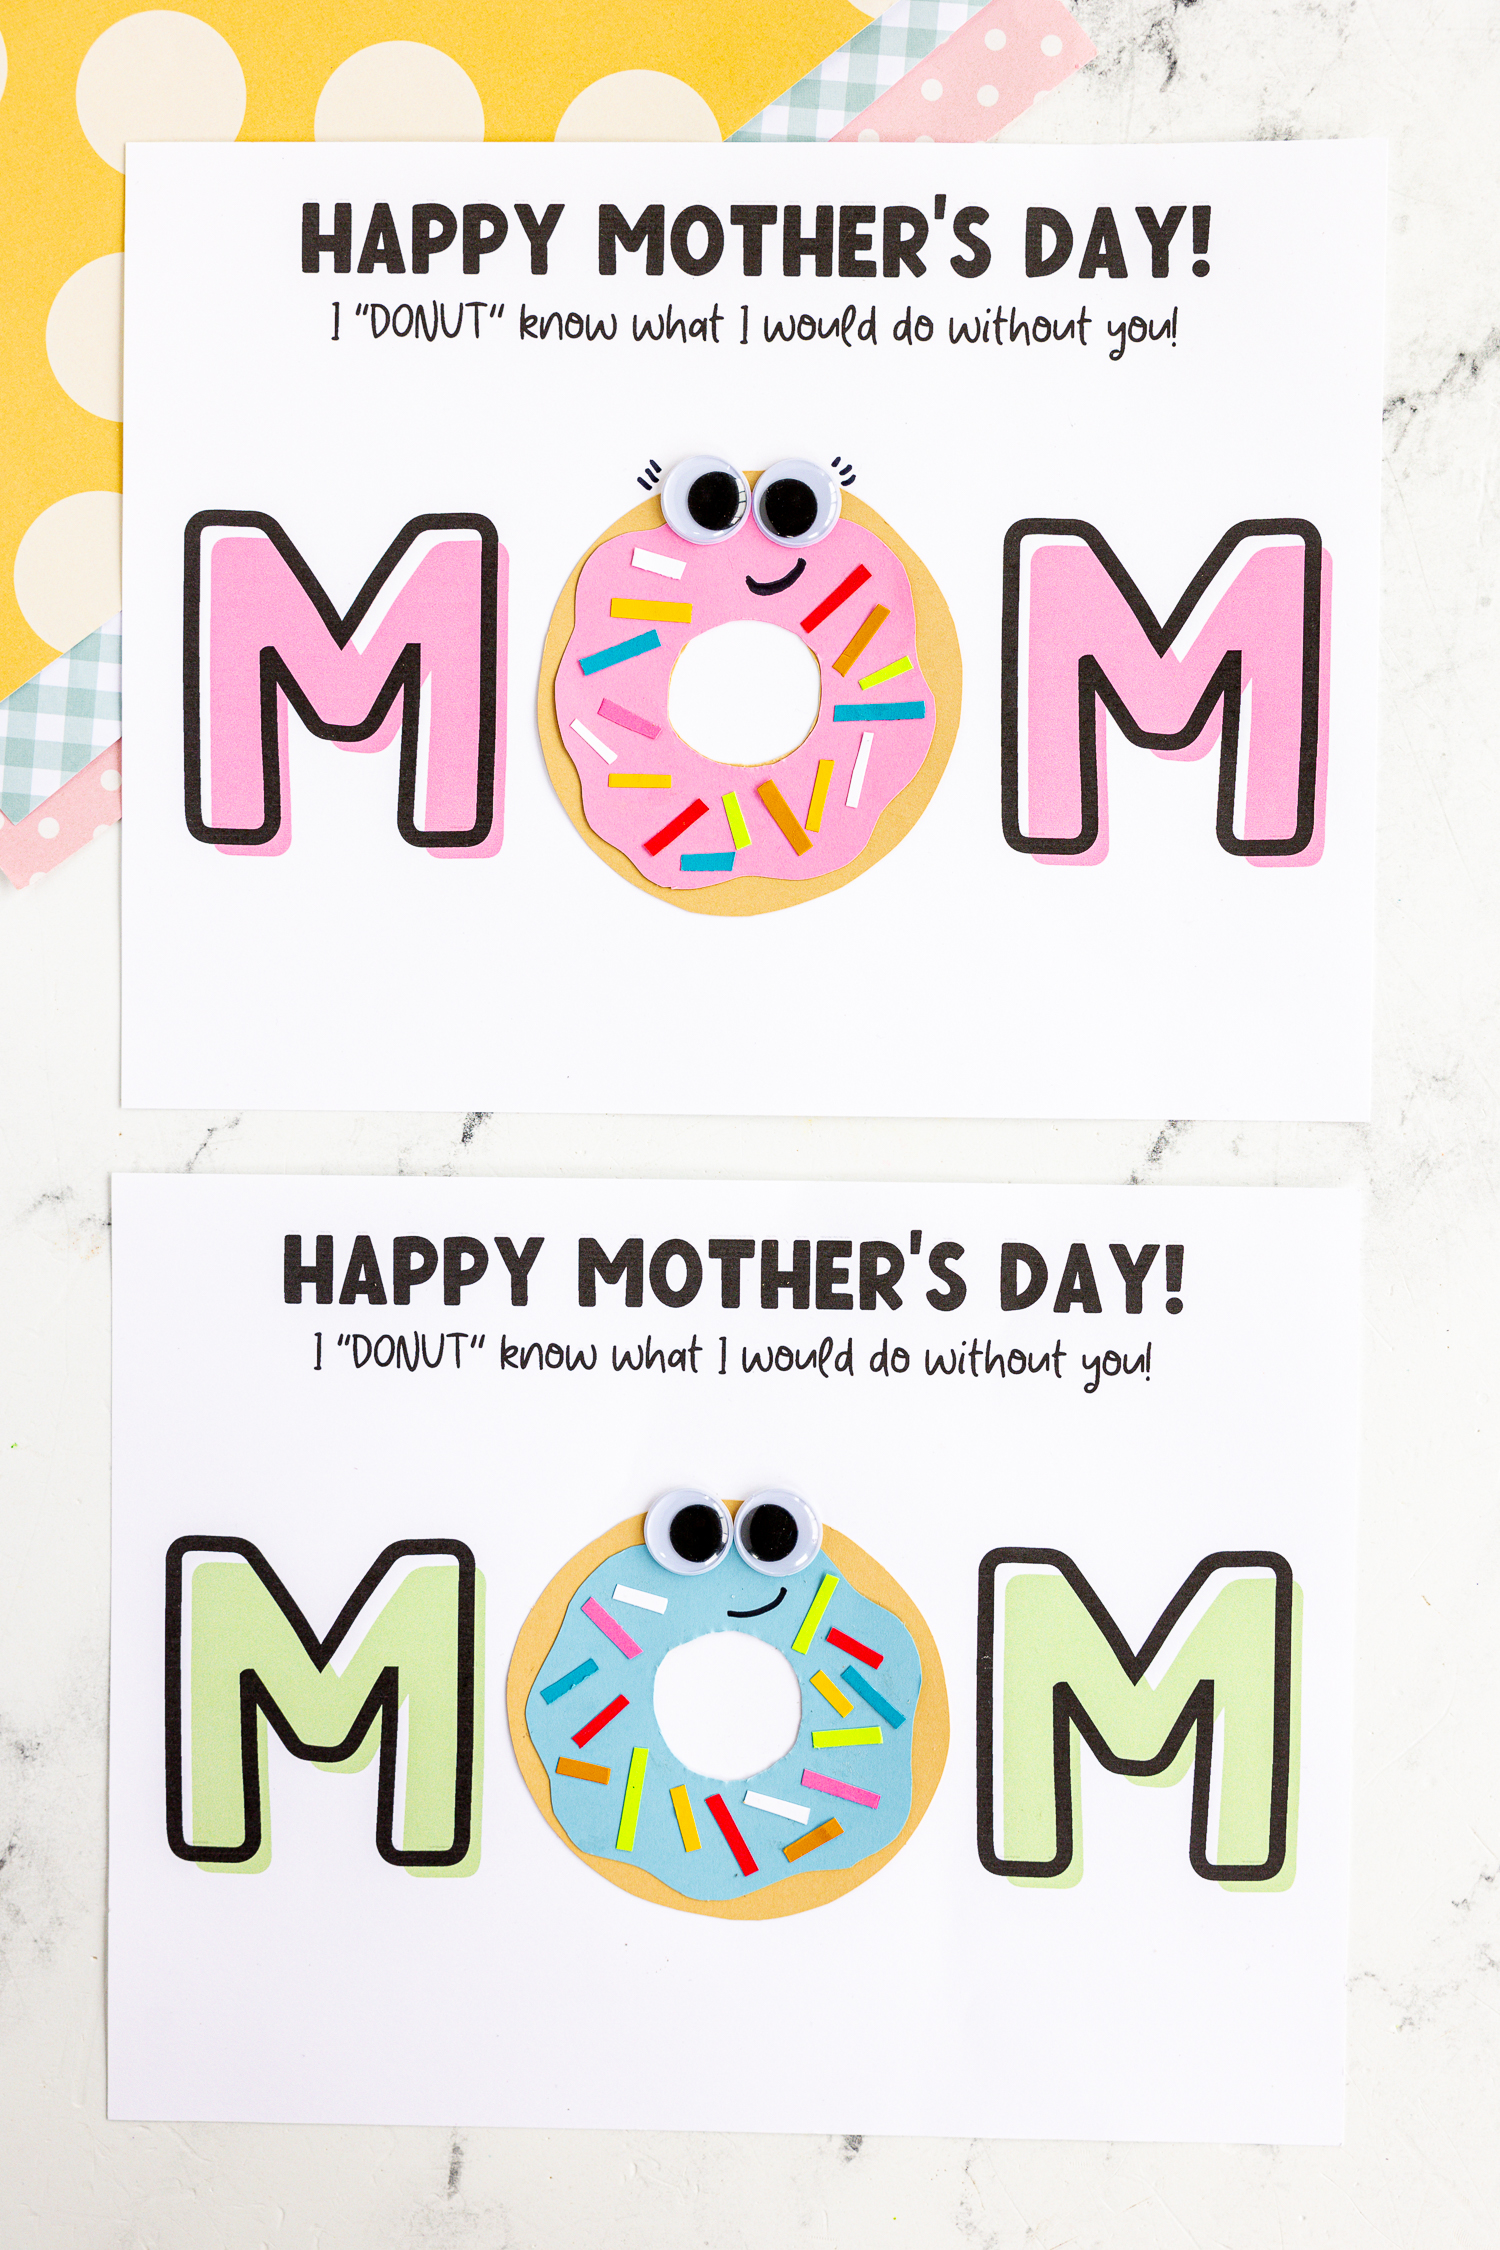 finished donut cards for moms. Pink version and a blue version available